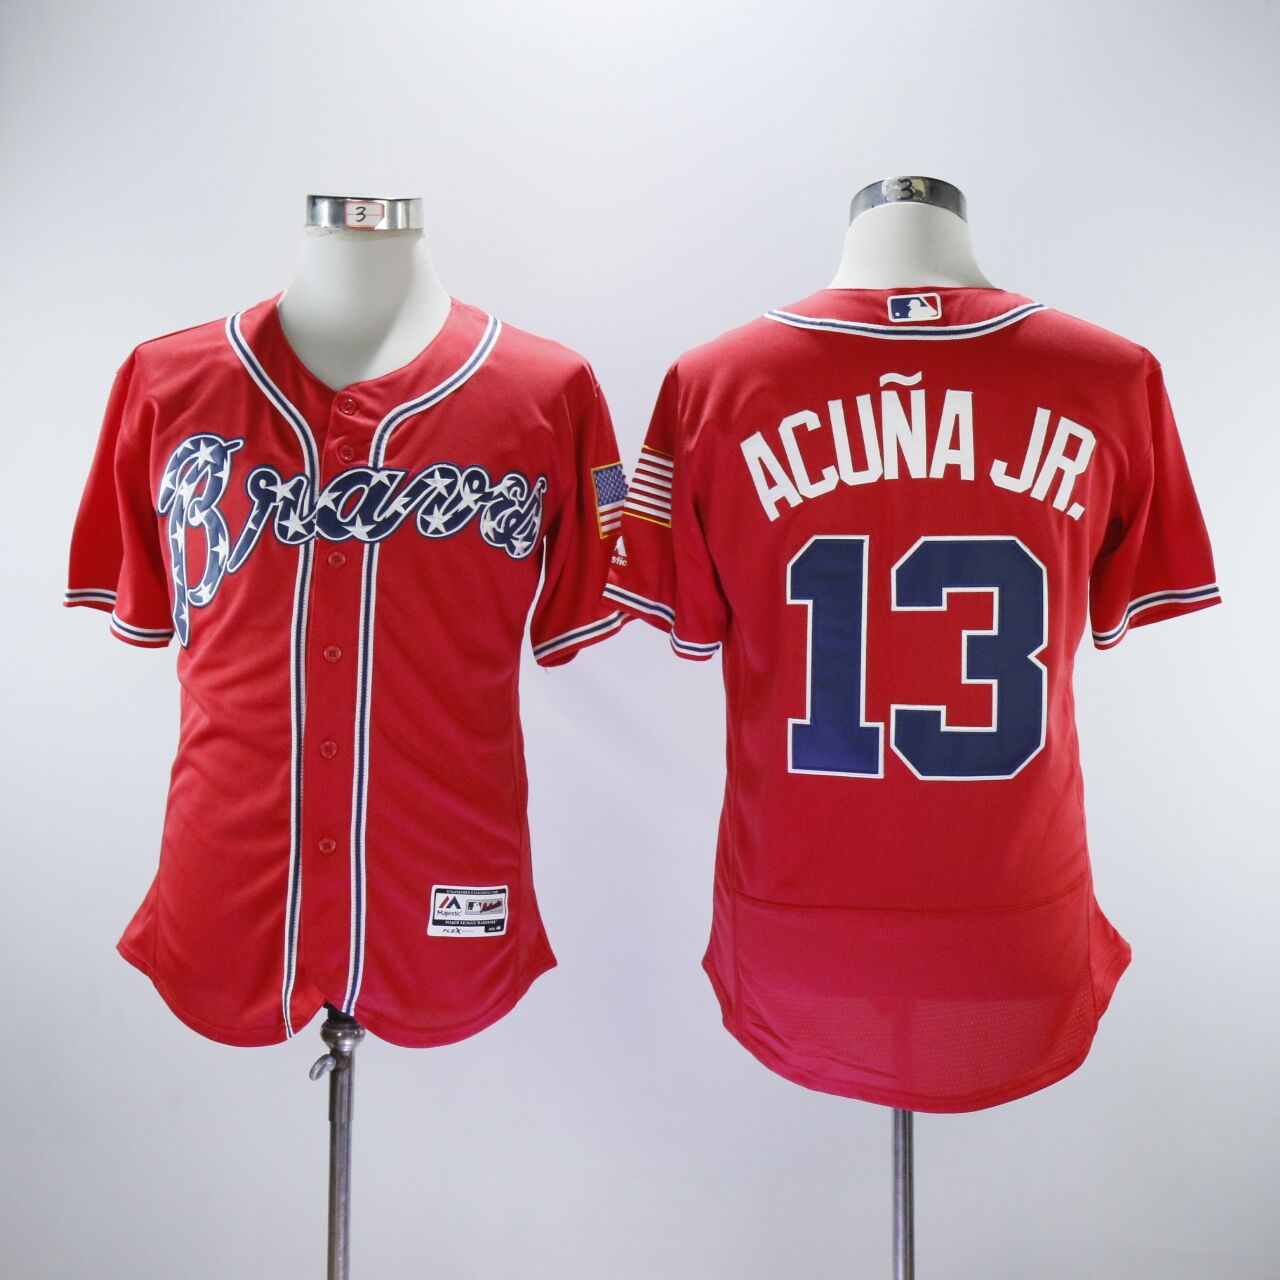 Braves 13 Ronald Acuna Jr. Red Flexbase Jersey - Click Image to Close